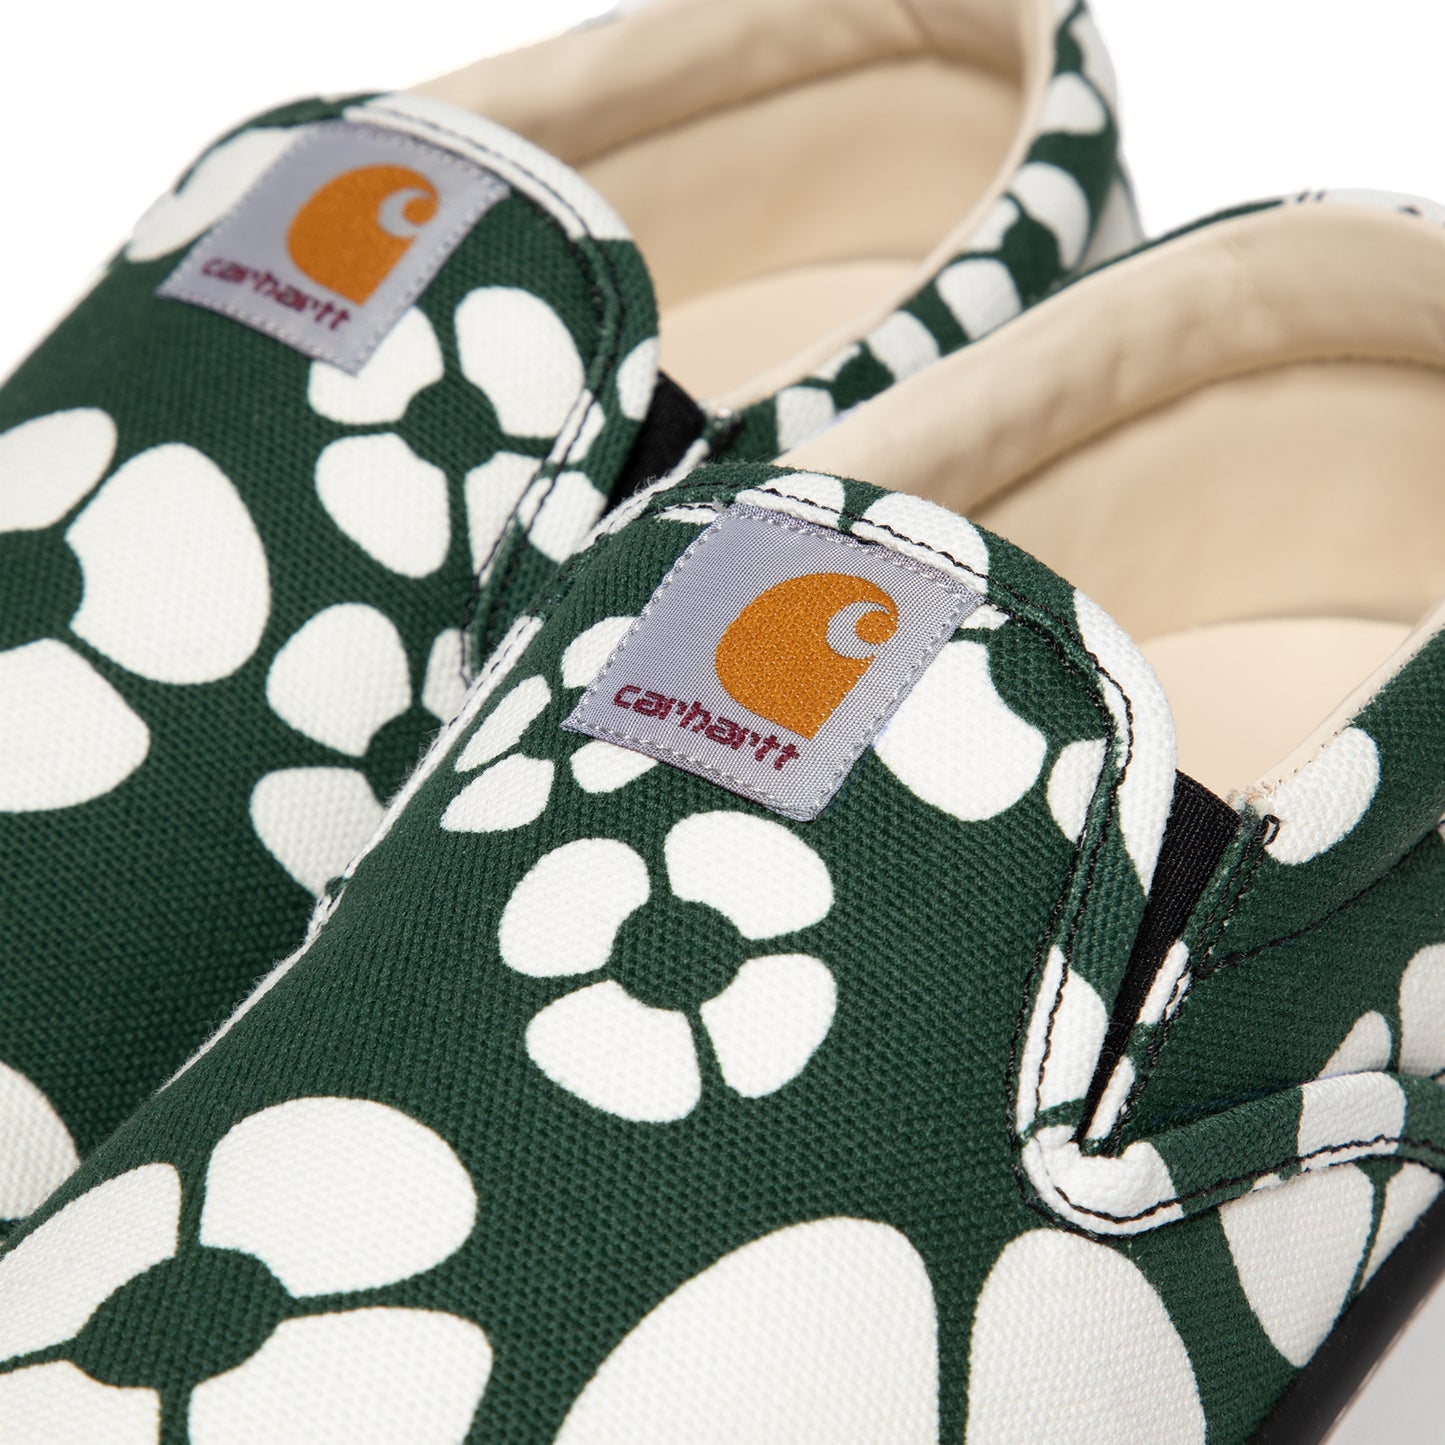 MARNI x Carhartt Clover Printed Canvas Upper Paw Sneaker (Forest Green/Stone White)